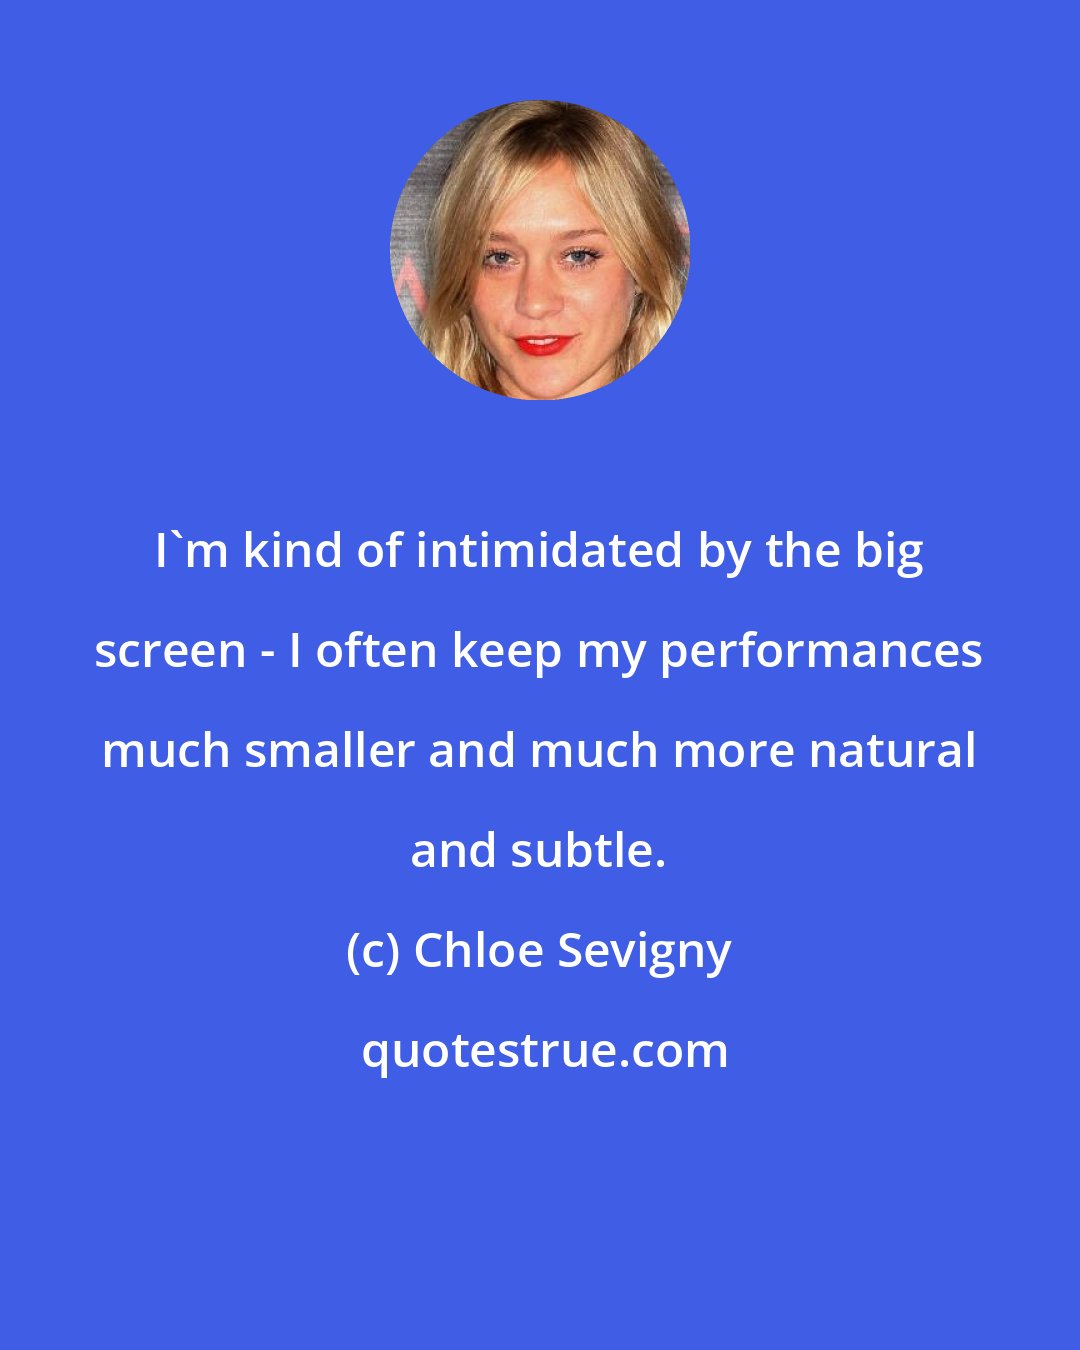 Chloe Sevigny: I'm kind of intimidated by the big screen - I often keep my performances much smaller and much more natural and subtle.